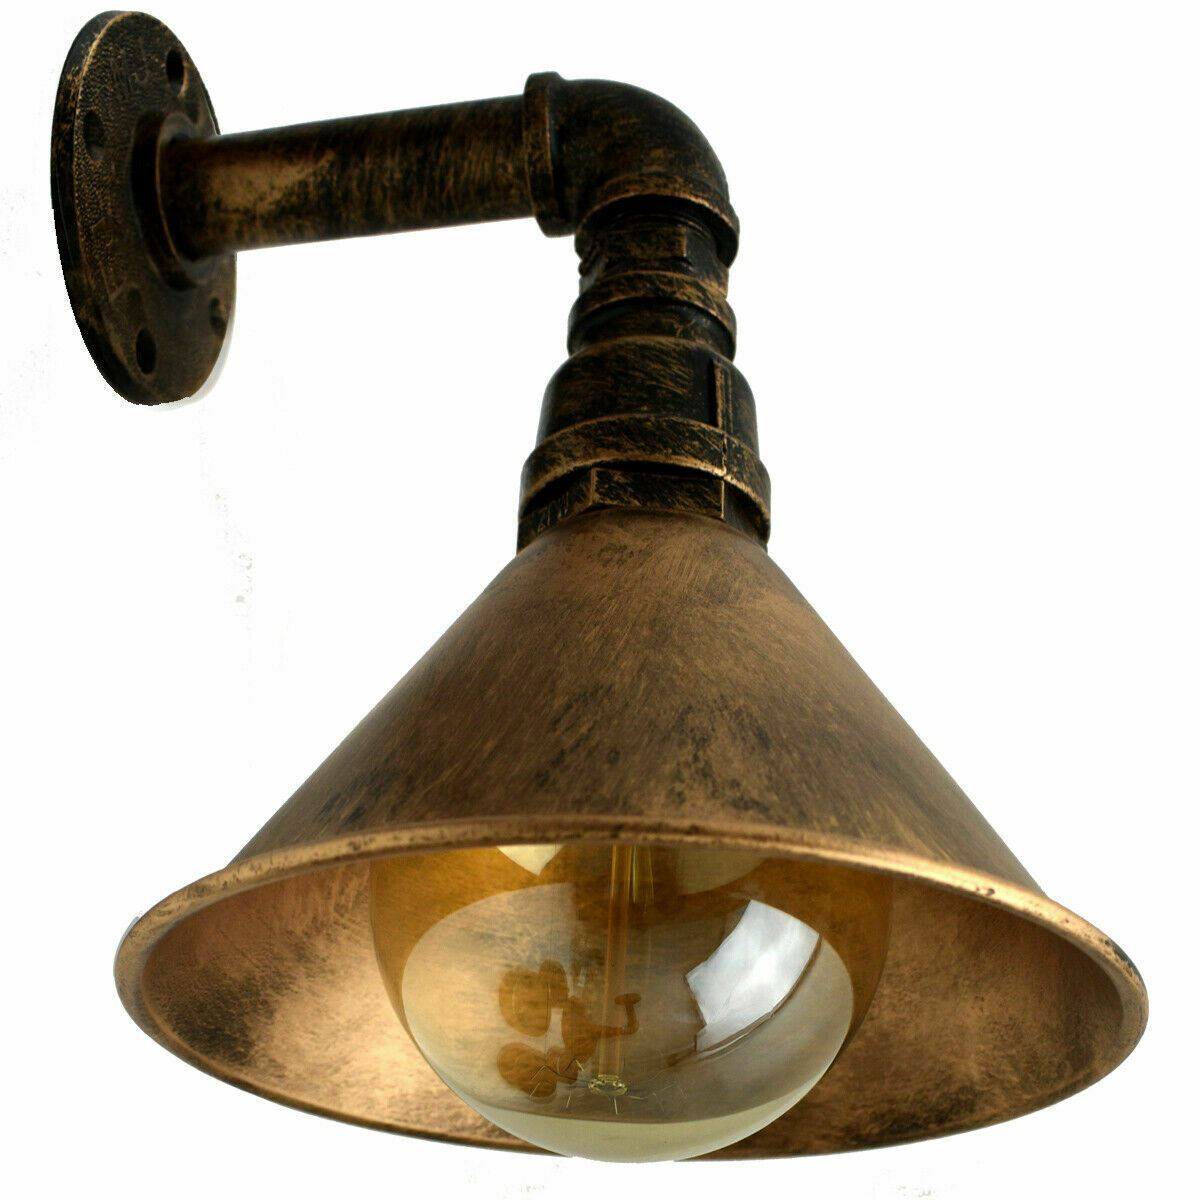 Modern Vintage Wall Mounted Light Sconce Lamp Indoor Fixture Cone Shape Metal Shade~1257